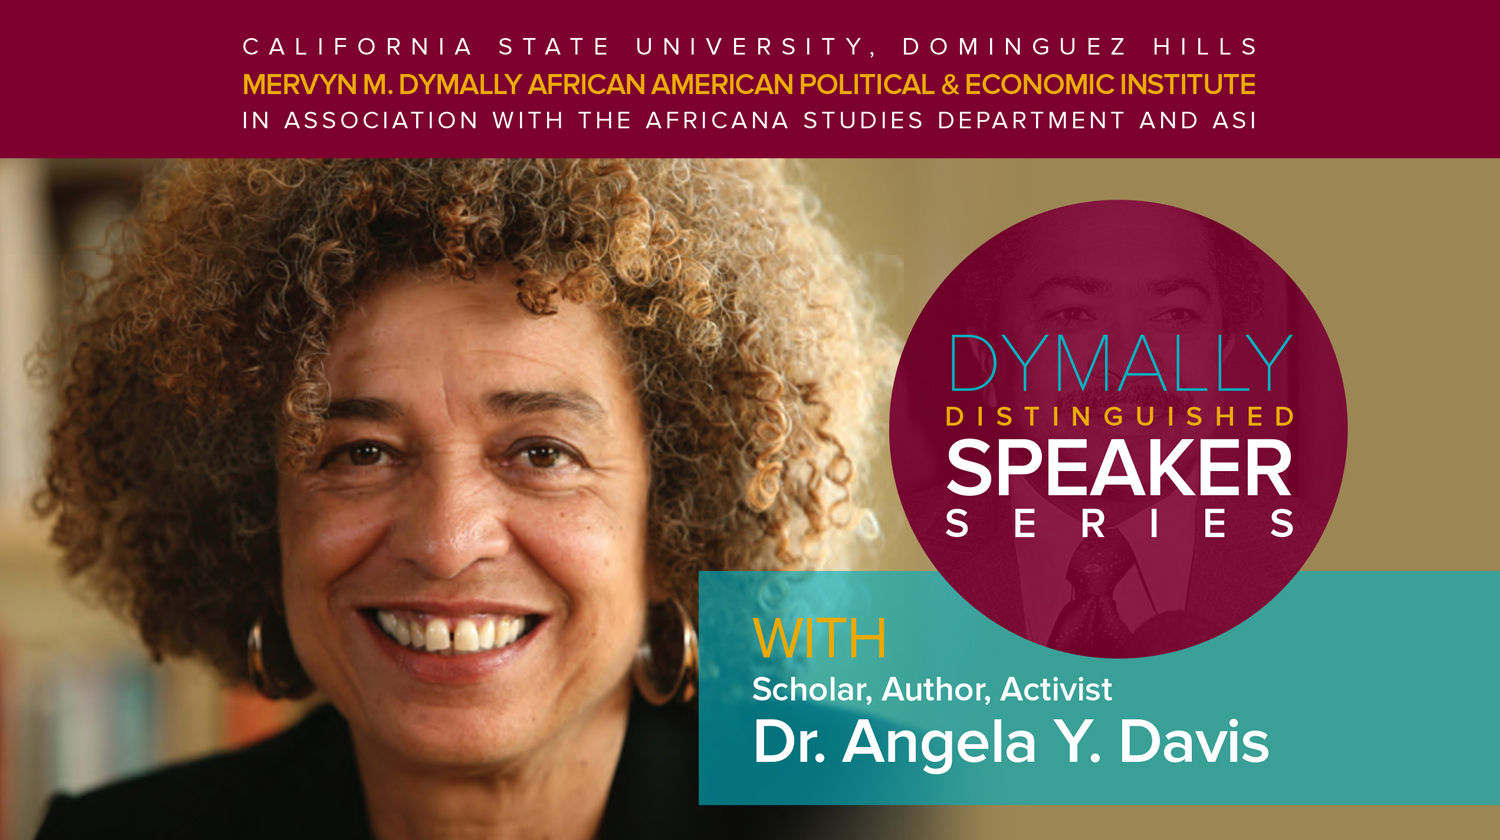 Noted Scholar, Author and Activist to Speak as Part of Black History Month